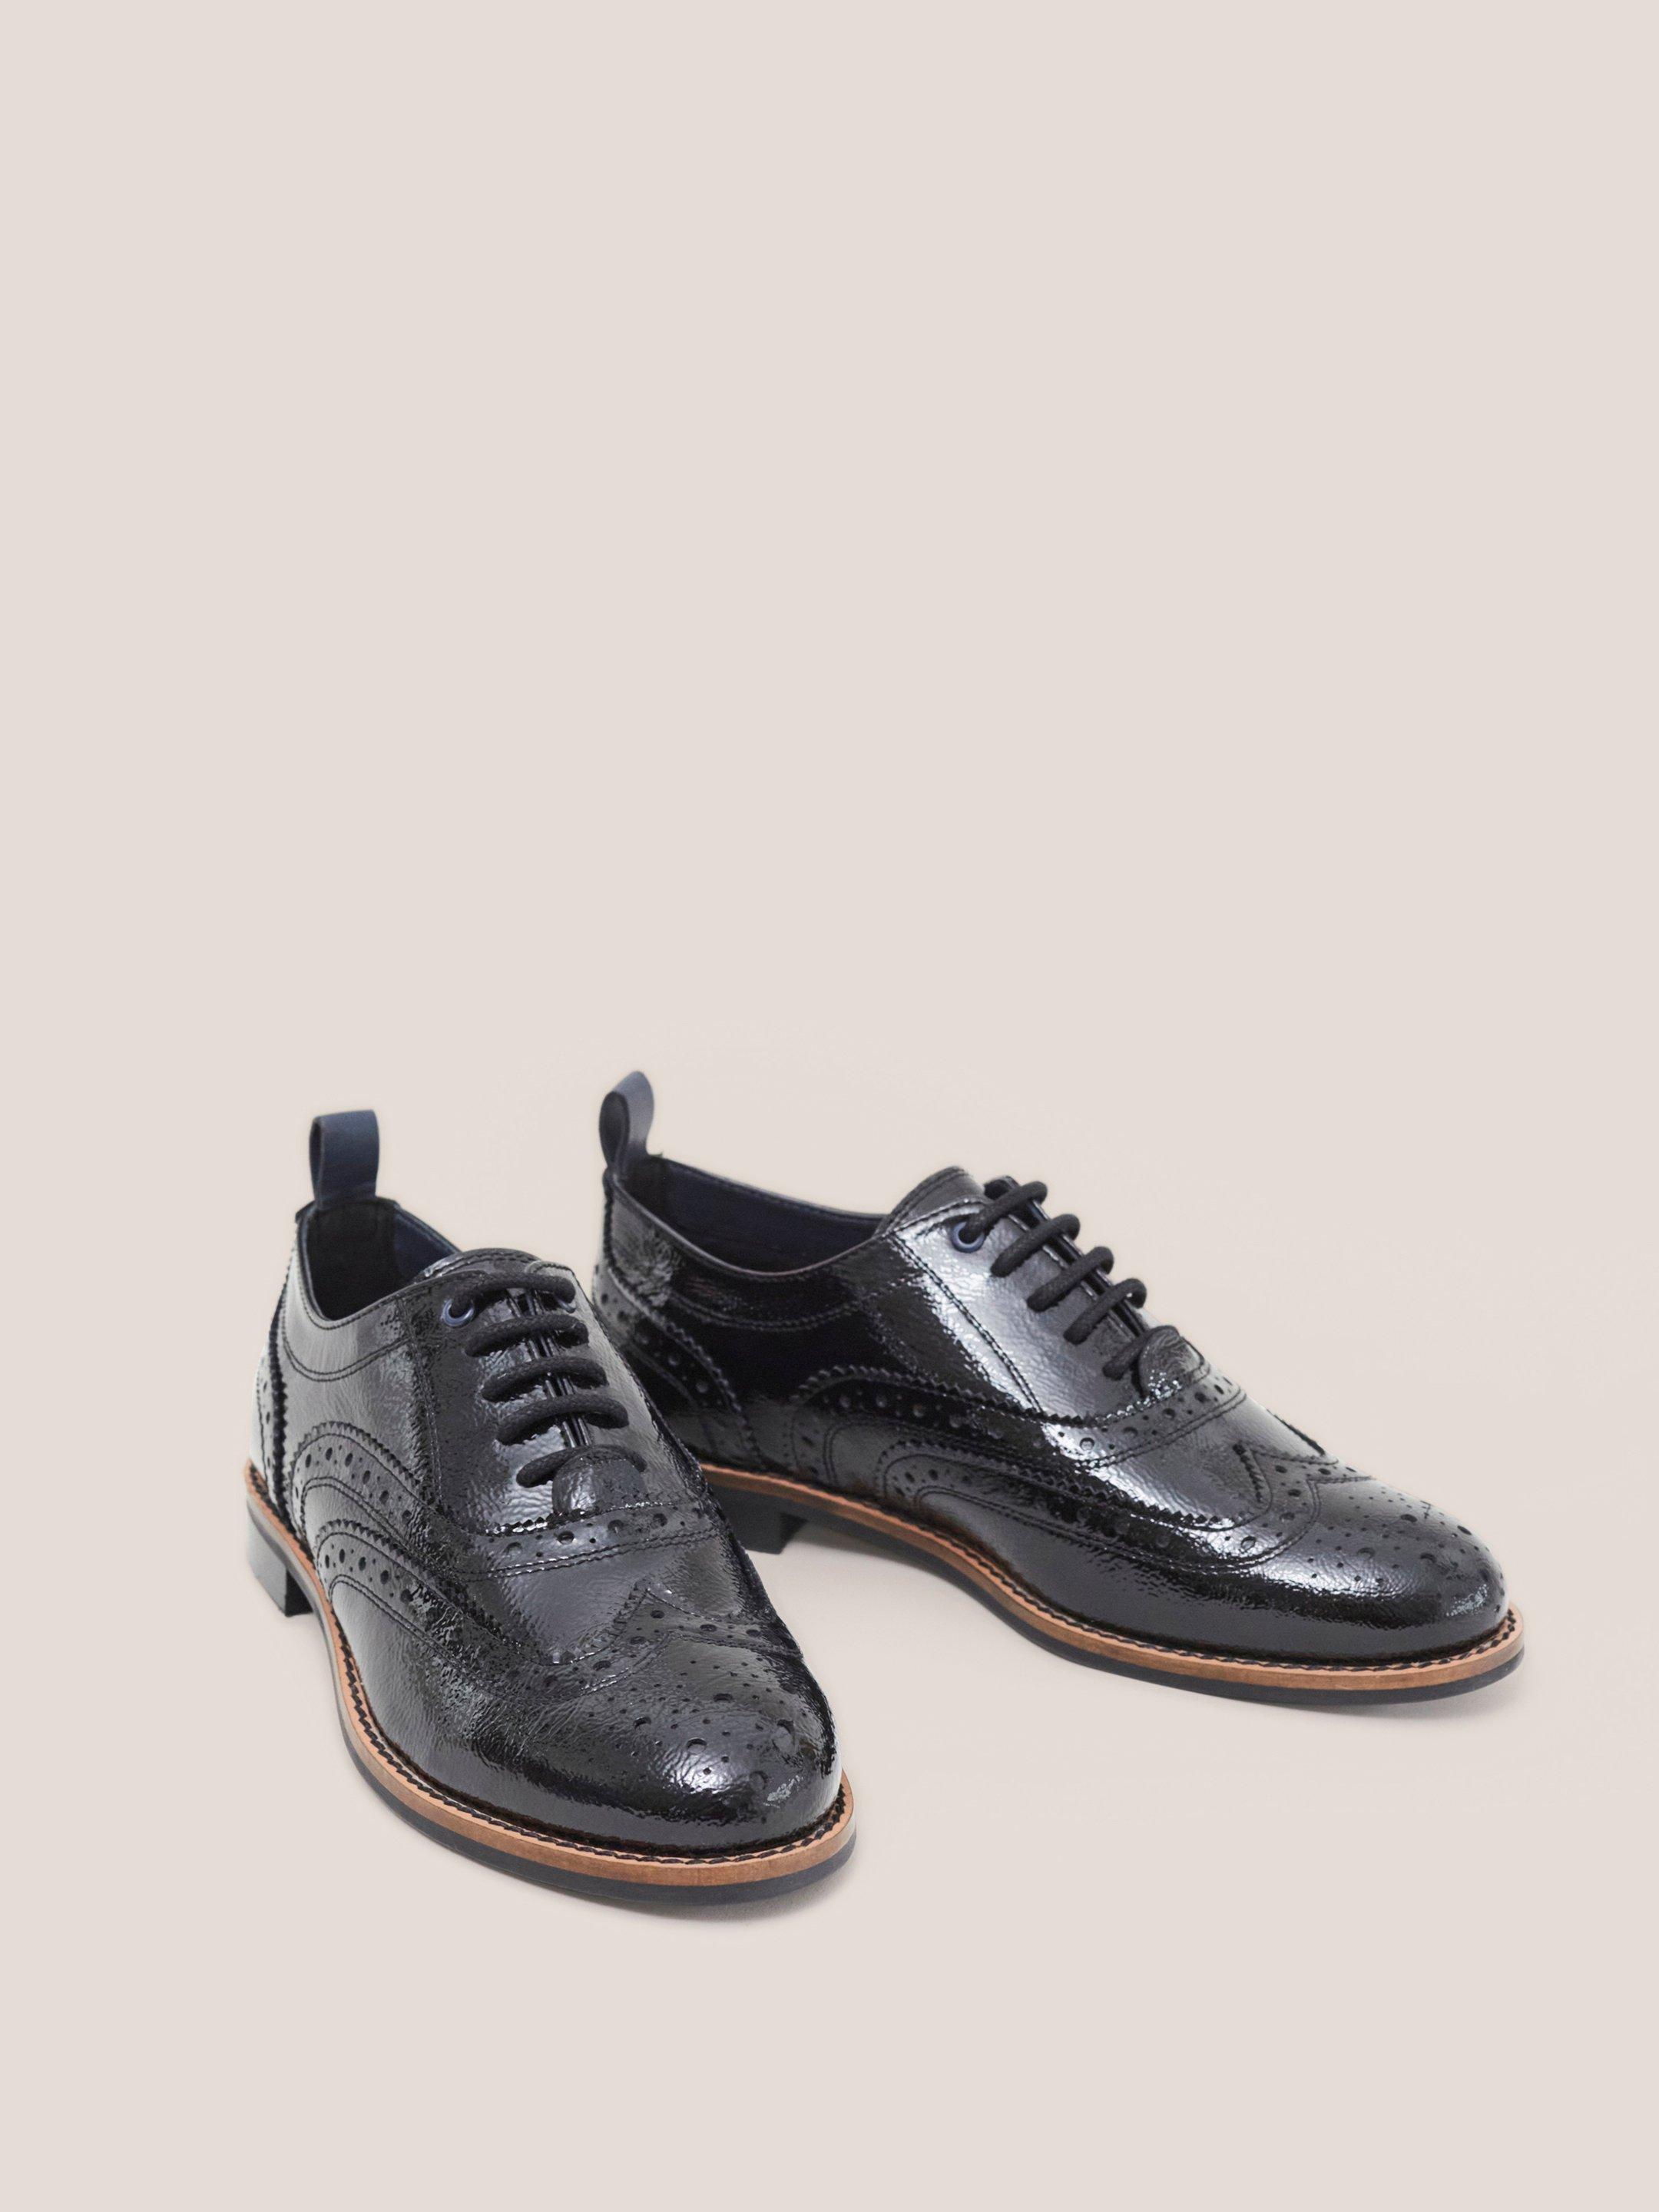 Thistle Patent Lace Up Brogue in PURE BLK - FLAT FRONT